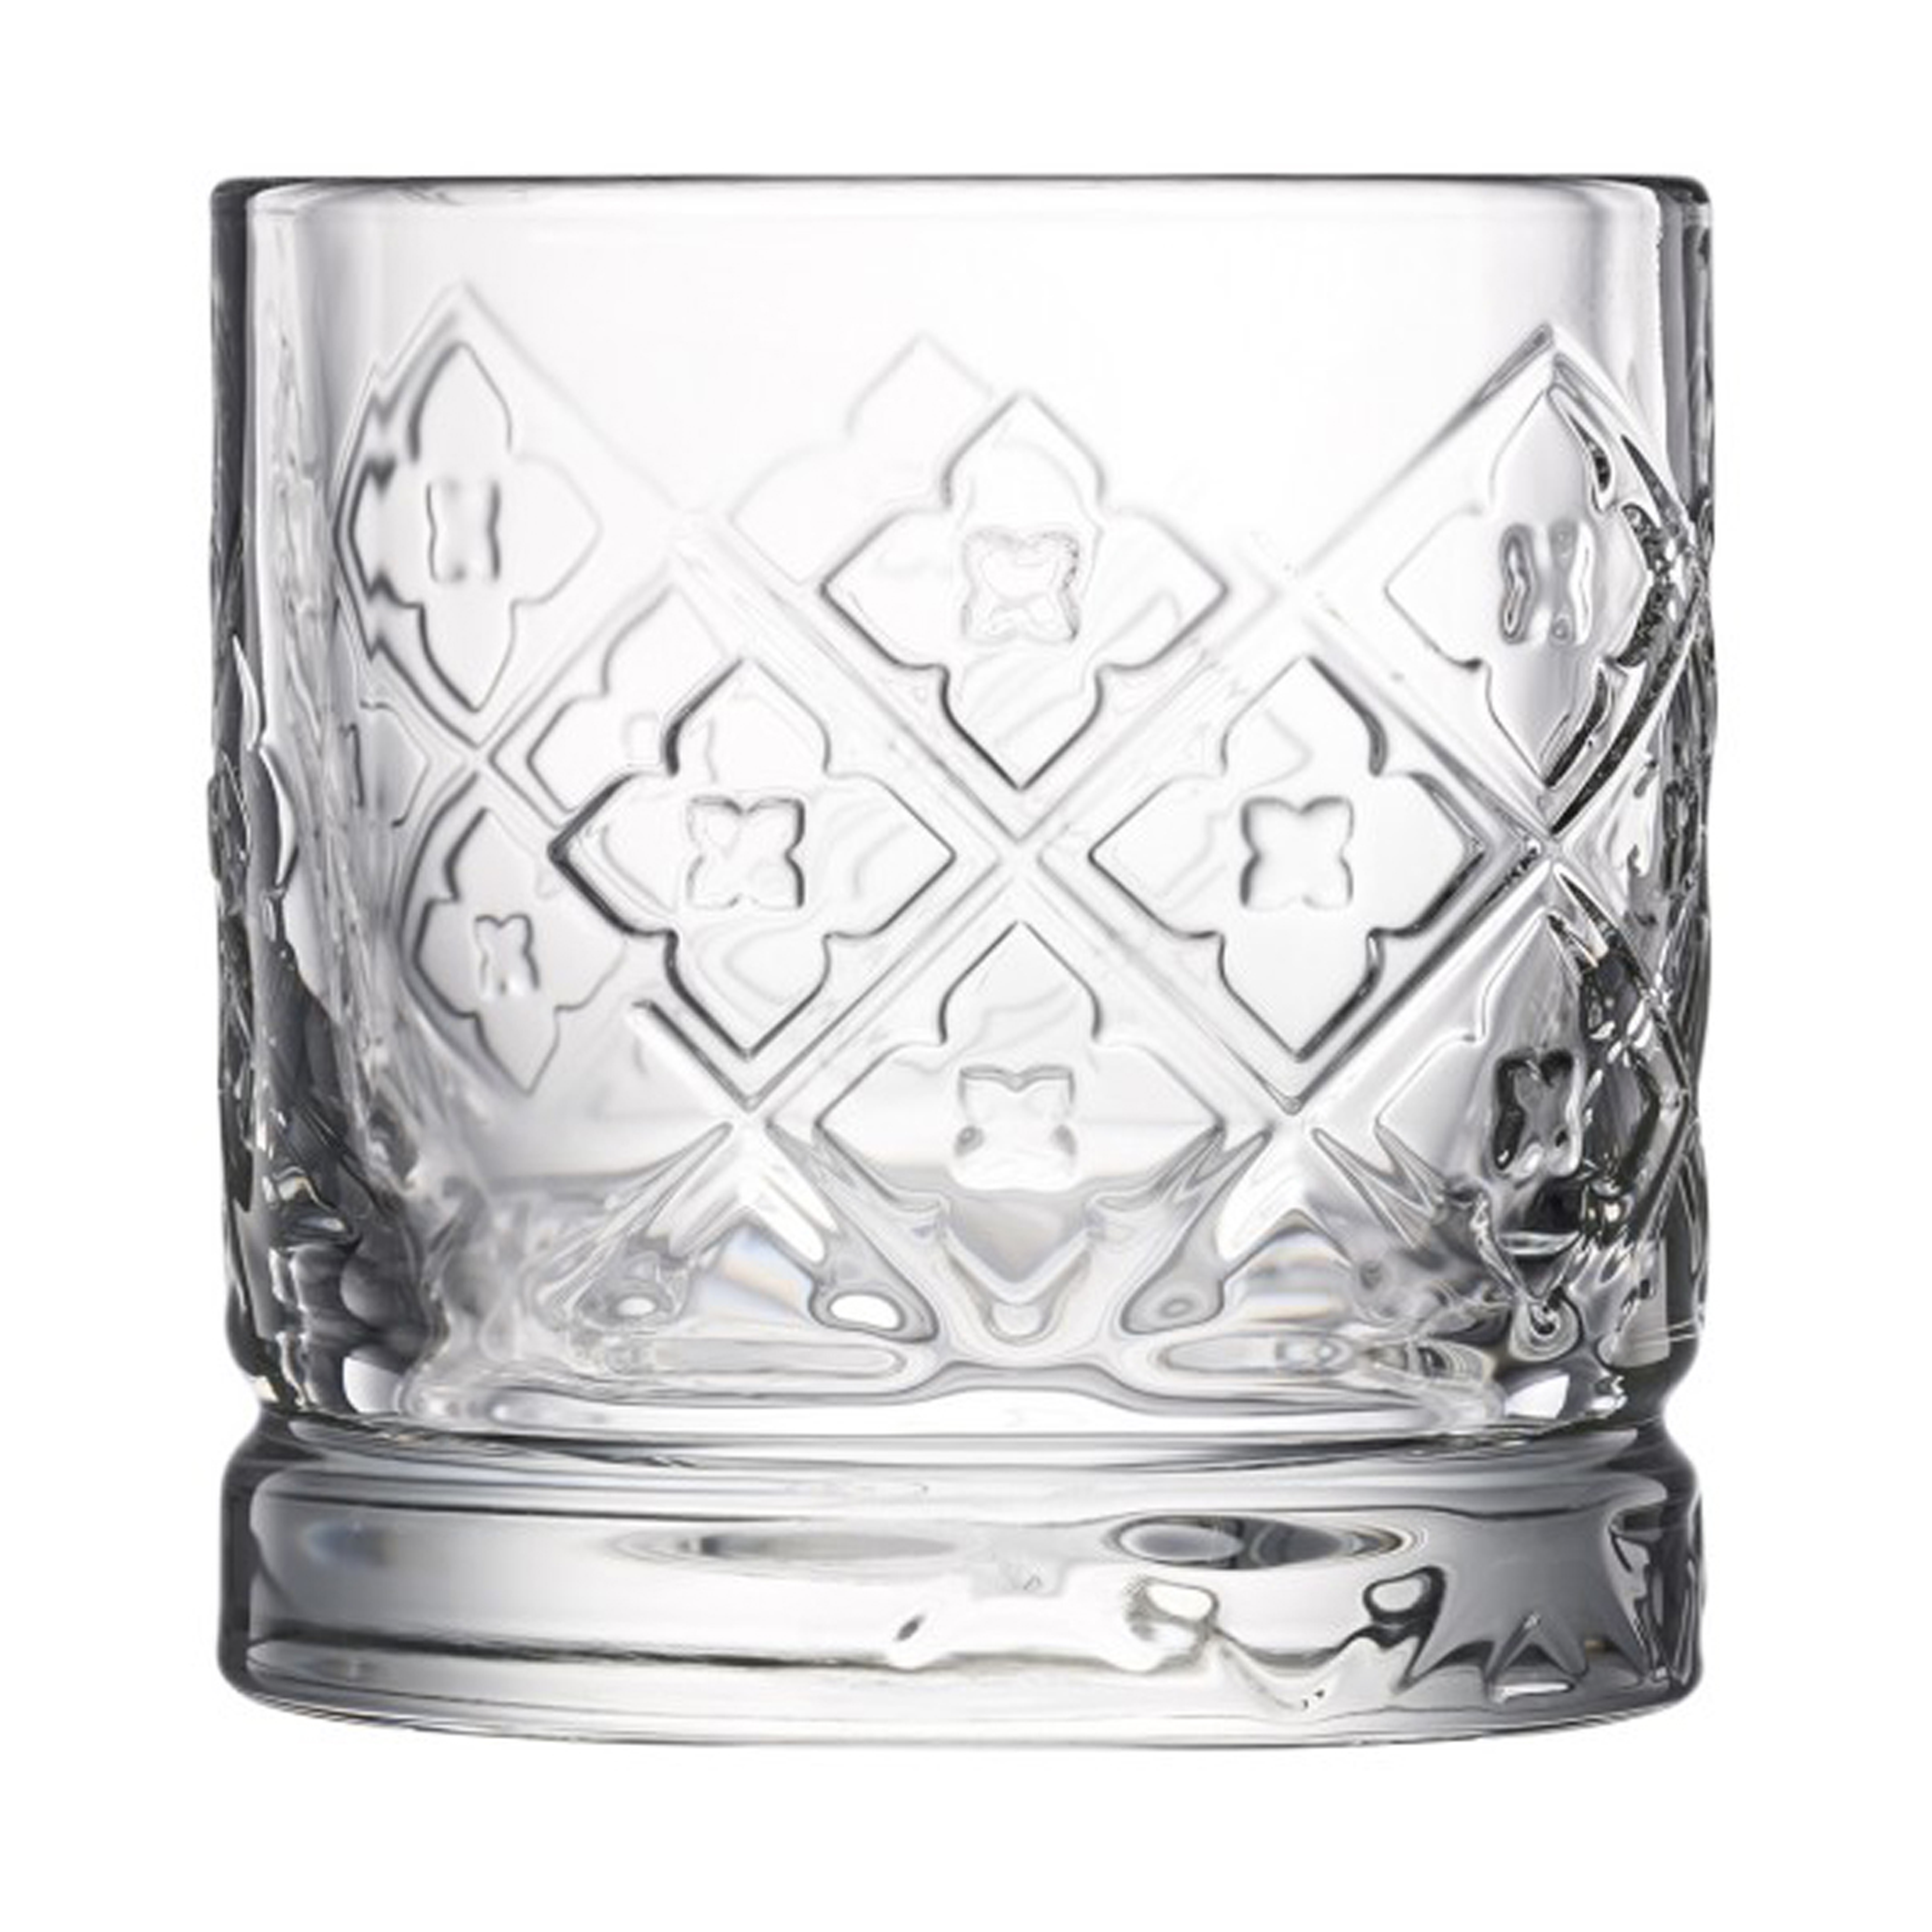 https://www.nordicnest.com/assets/blobs/la-rochere-dandy-whiskey-glass-4-pieces-clear/585263-01_20_ProductImageExtra-115438ead4.png